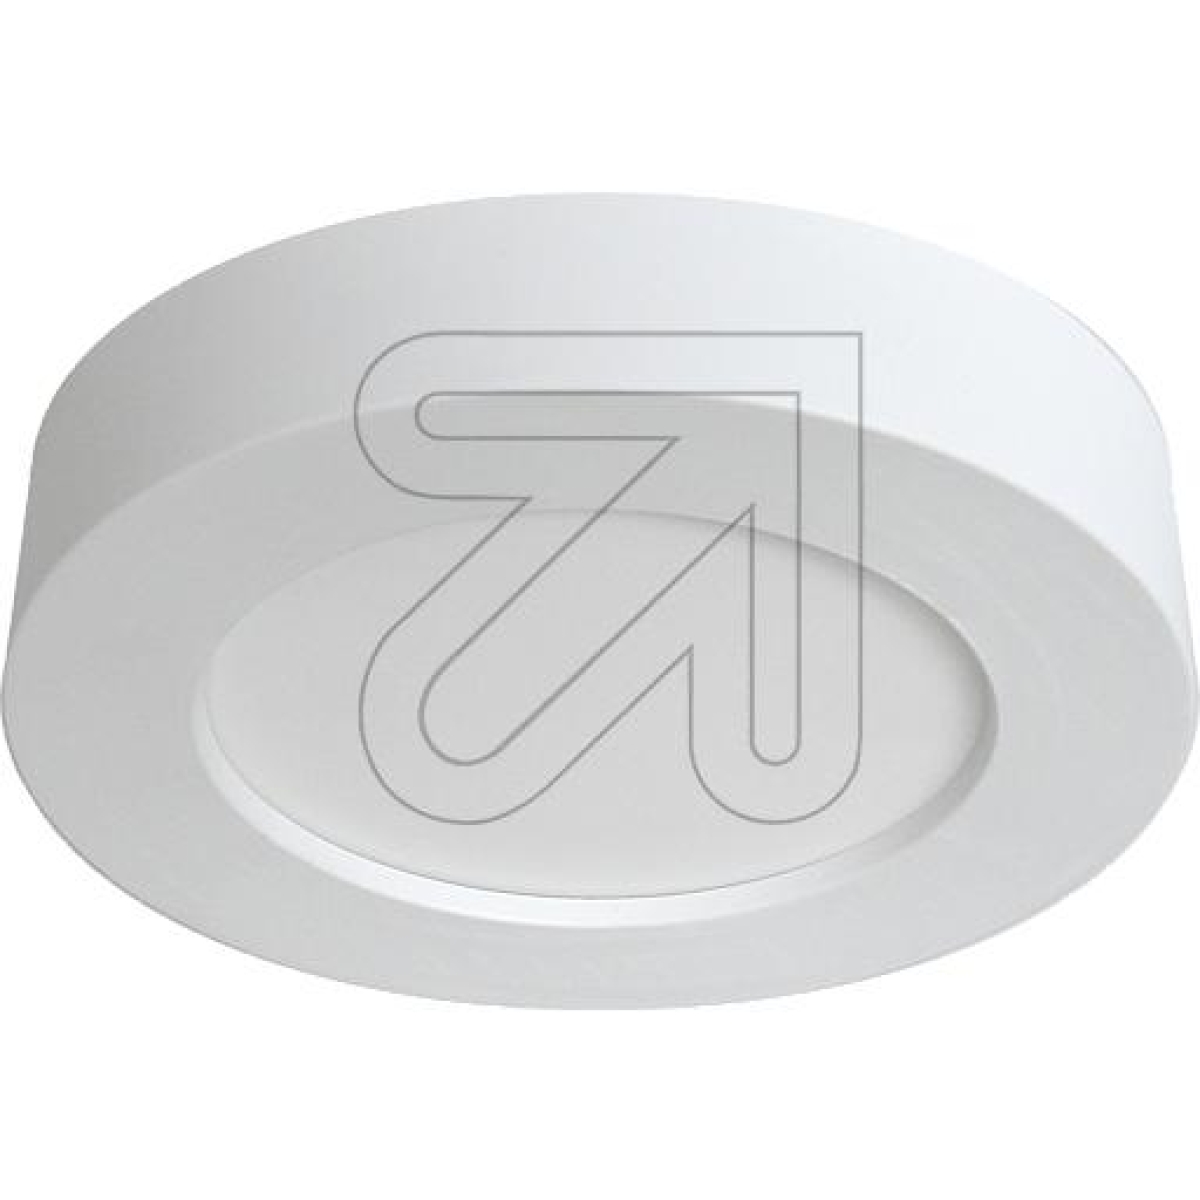 EGBLED surface-mounted and built-in panel CCT, 12W round AØ150mm, 3000/4000/6000K - 1140/1200/1140lmArticle-No: 639725